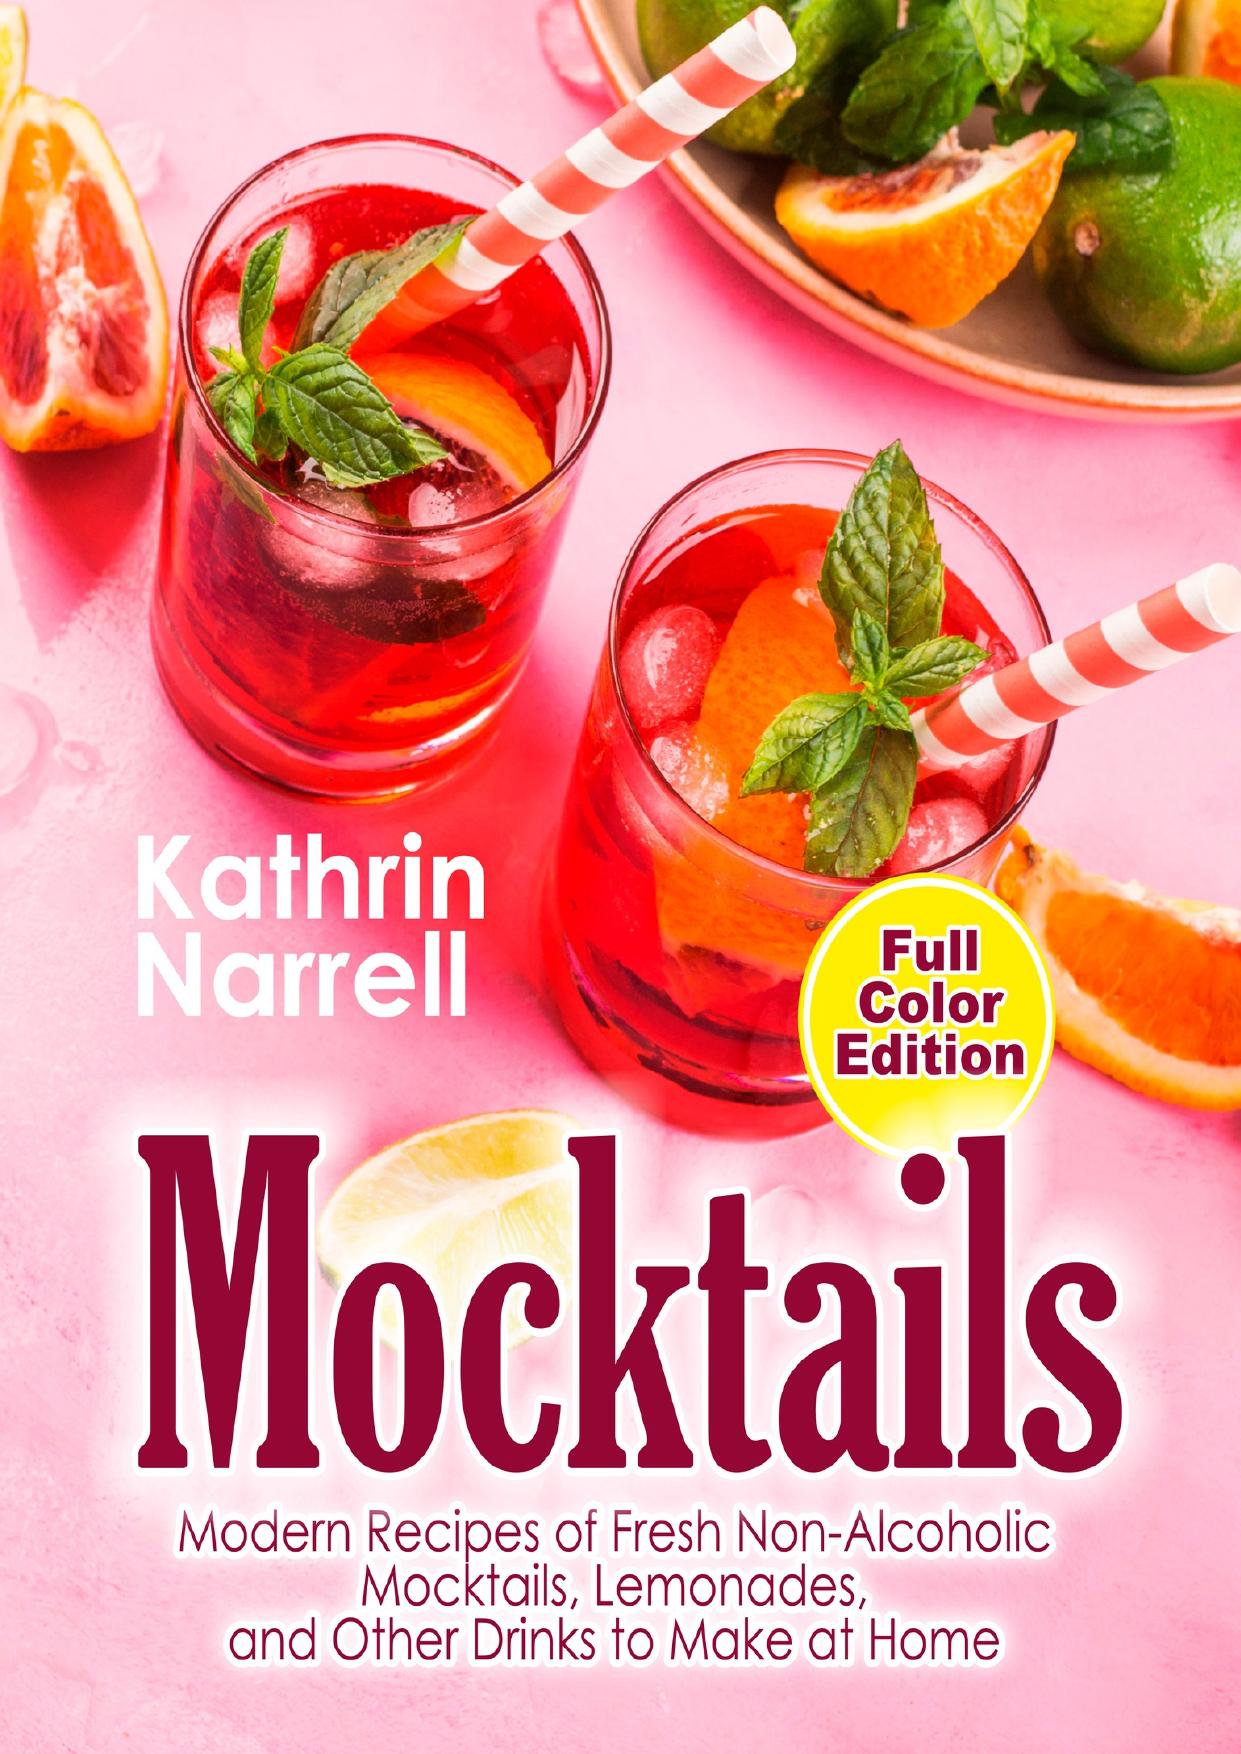 Mocktails: Modern Recipes of Fresh Non-Alcoholic Mocktails, Lemonades, and Other Drinks to Make at Home by Narrell Kathrin